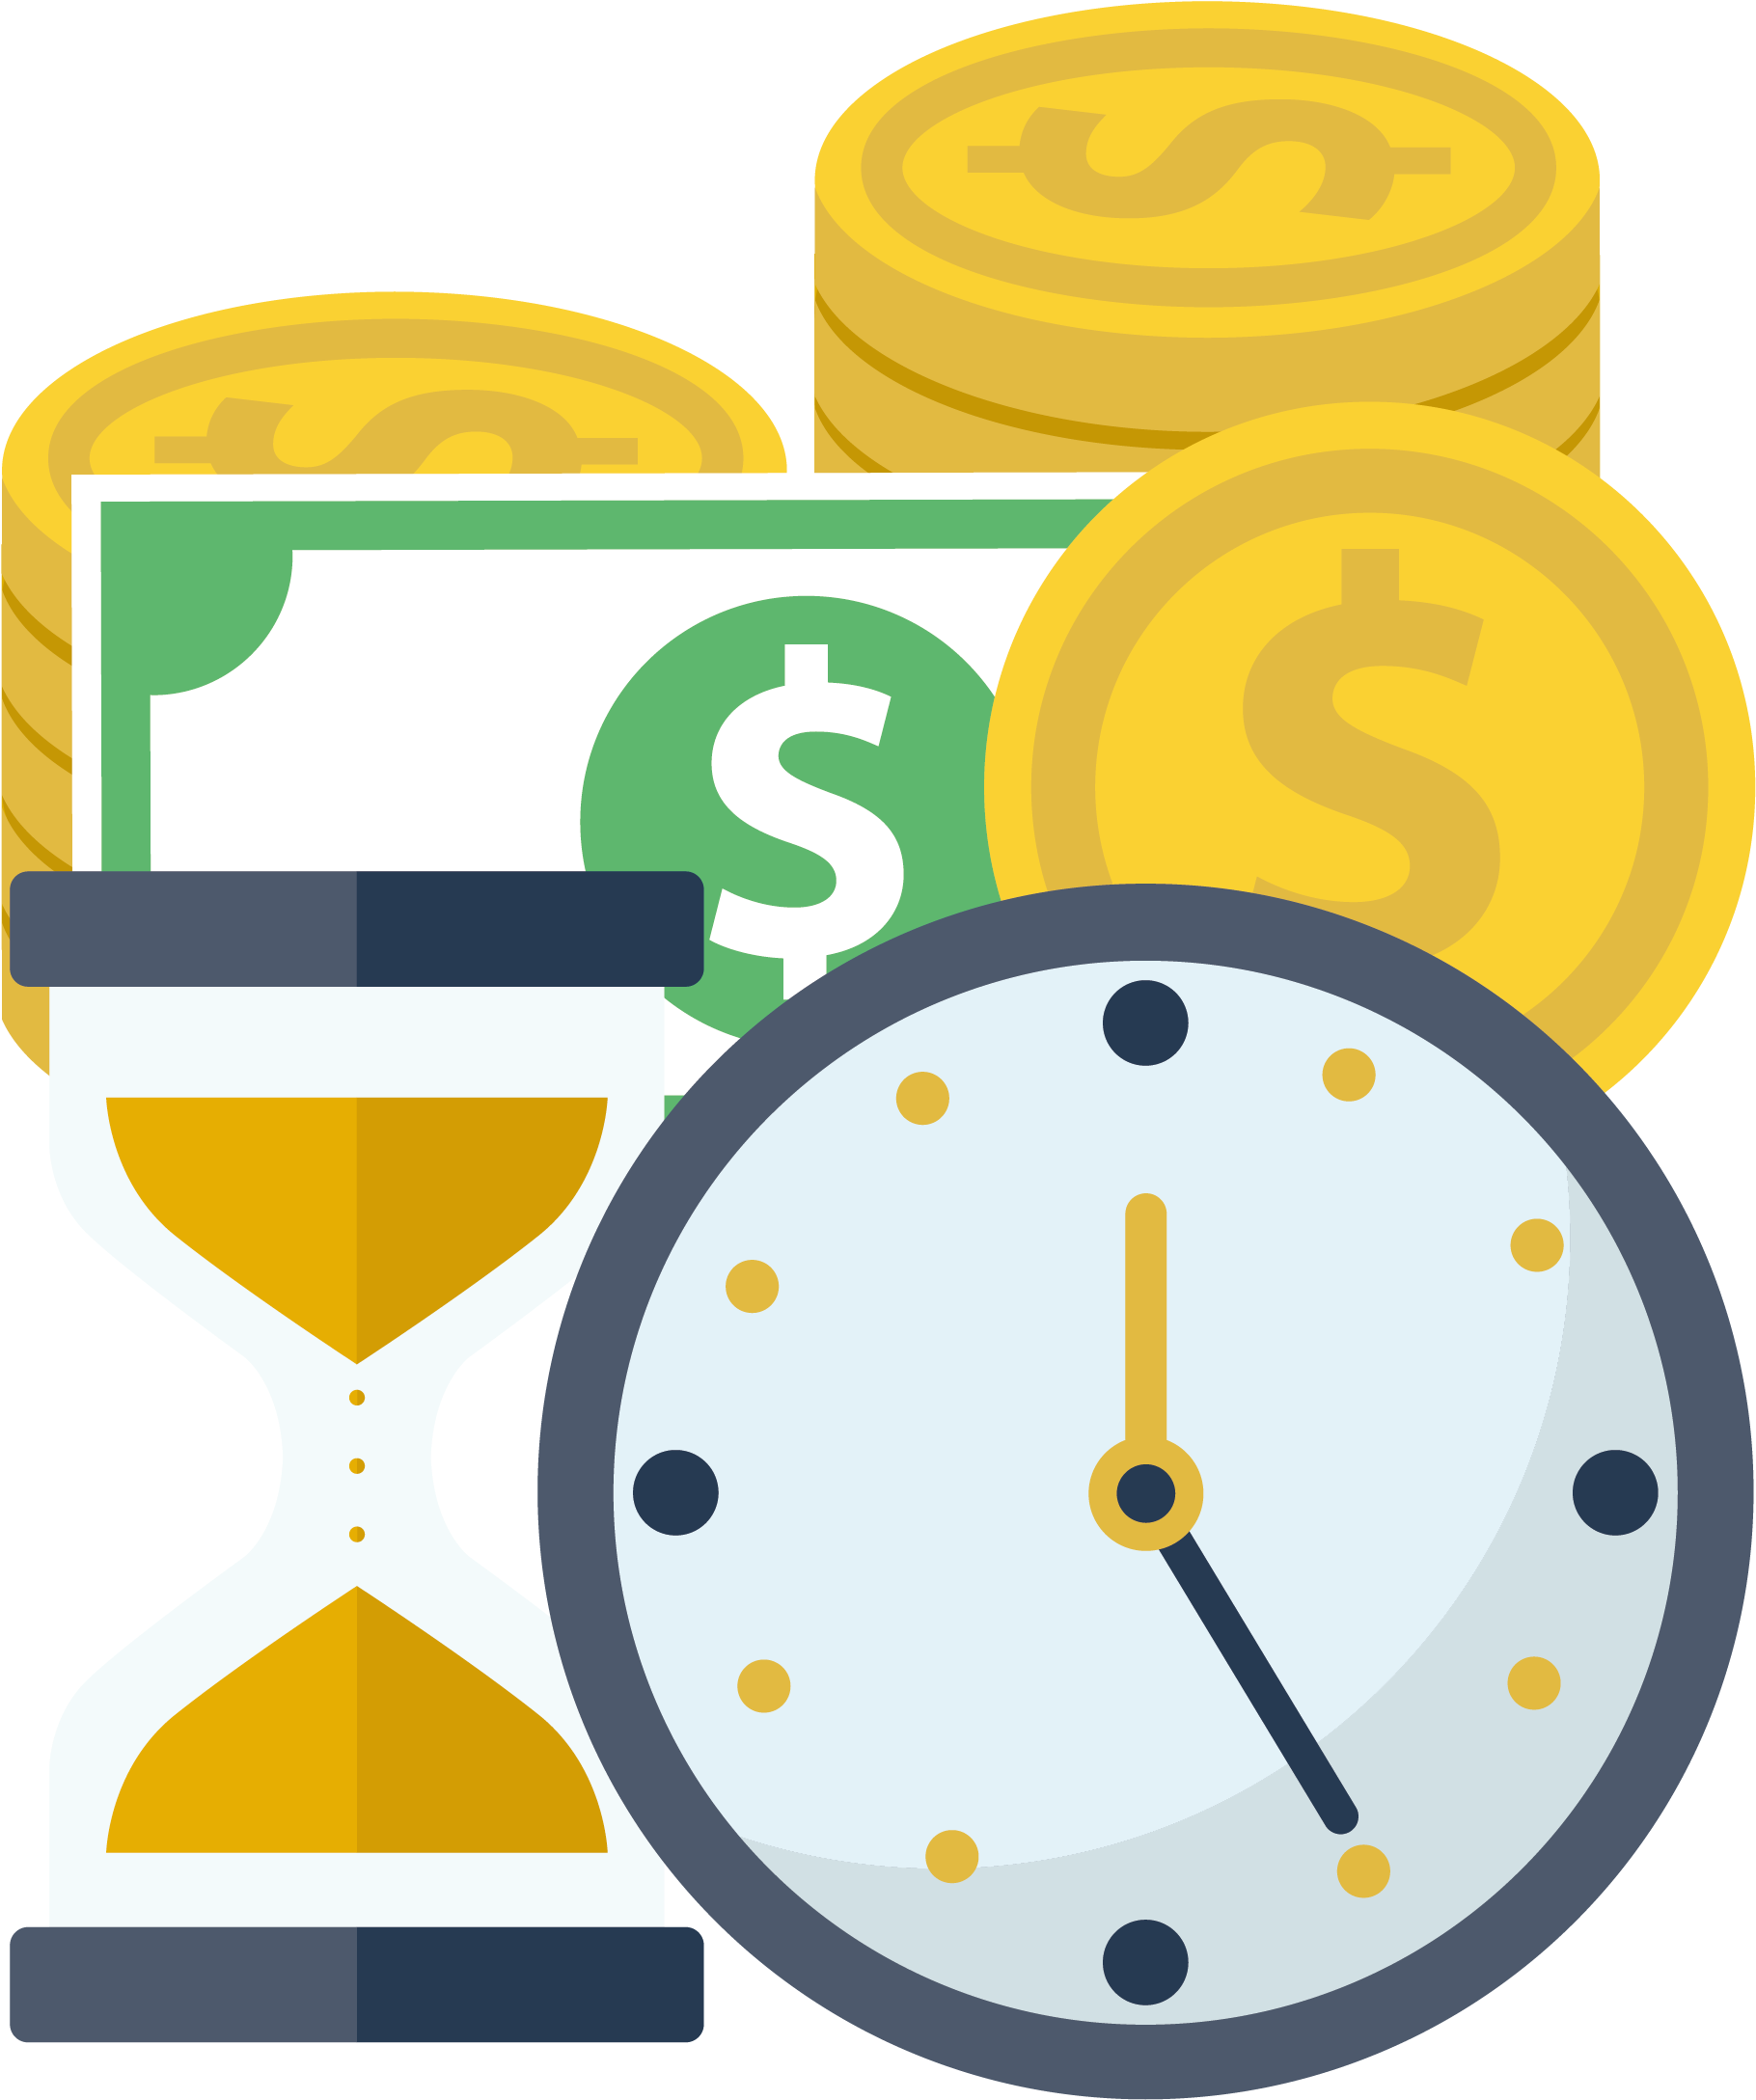 Time Value Of Money Flat Design Finance - Tax Saving Mutual Funds (2917x2917)